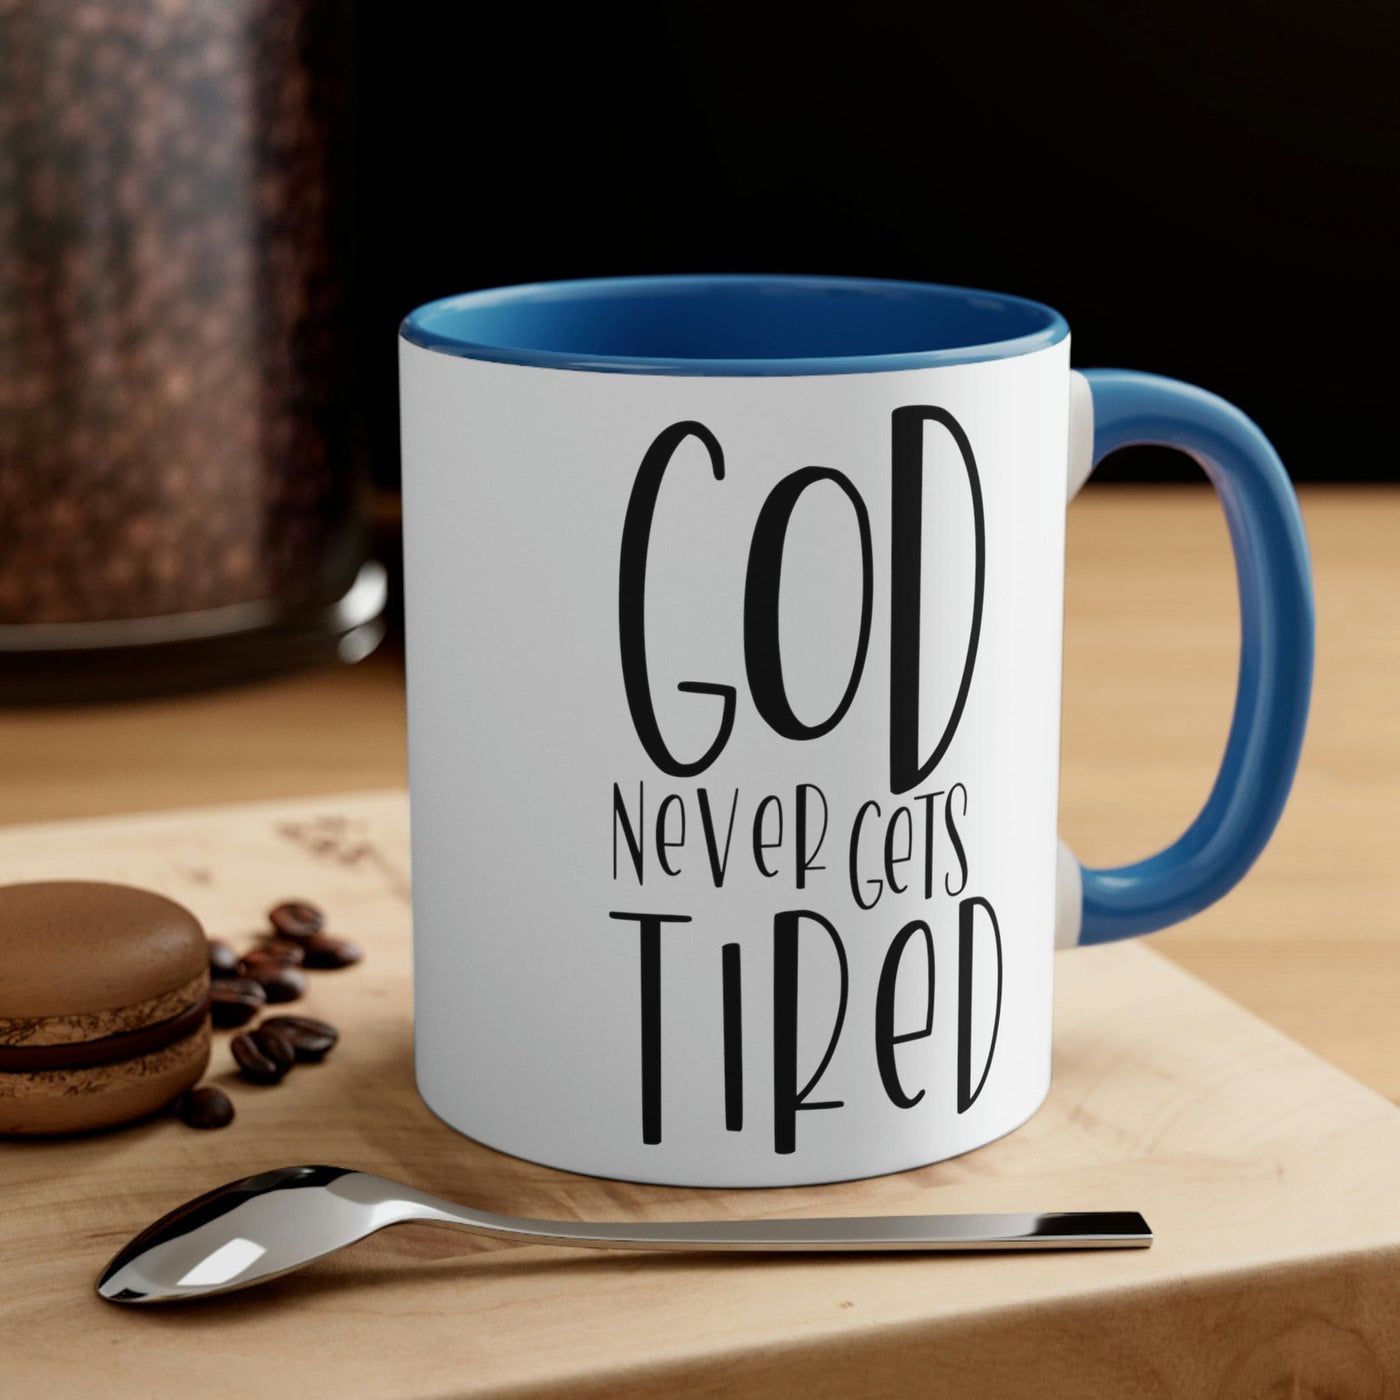 Two-tone Accent Ceramic Mug 11oz Say It Soul - God Never Gets Tired